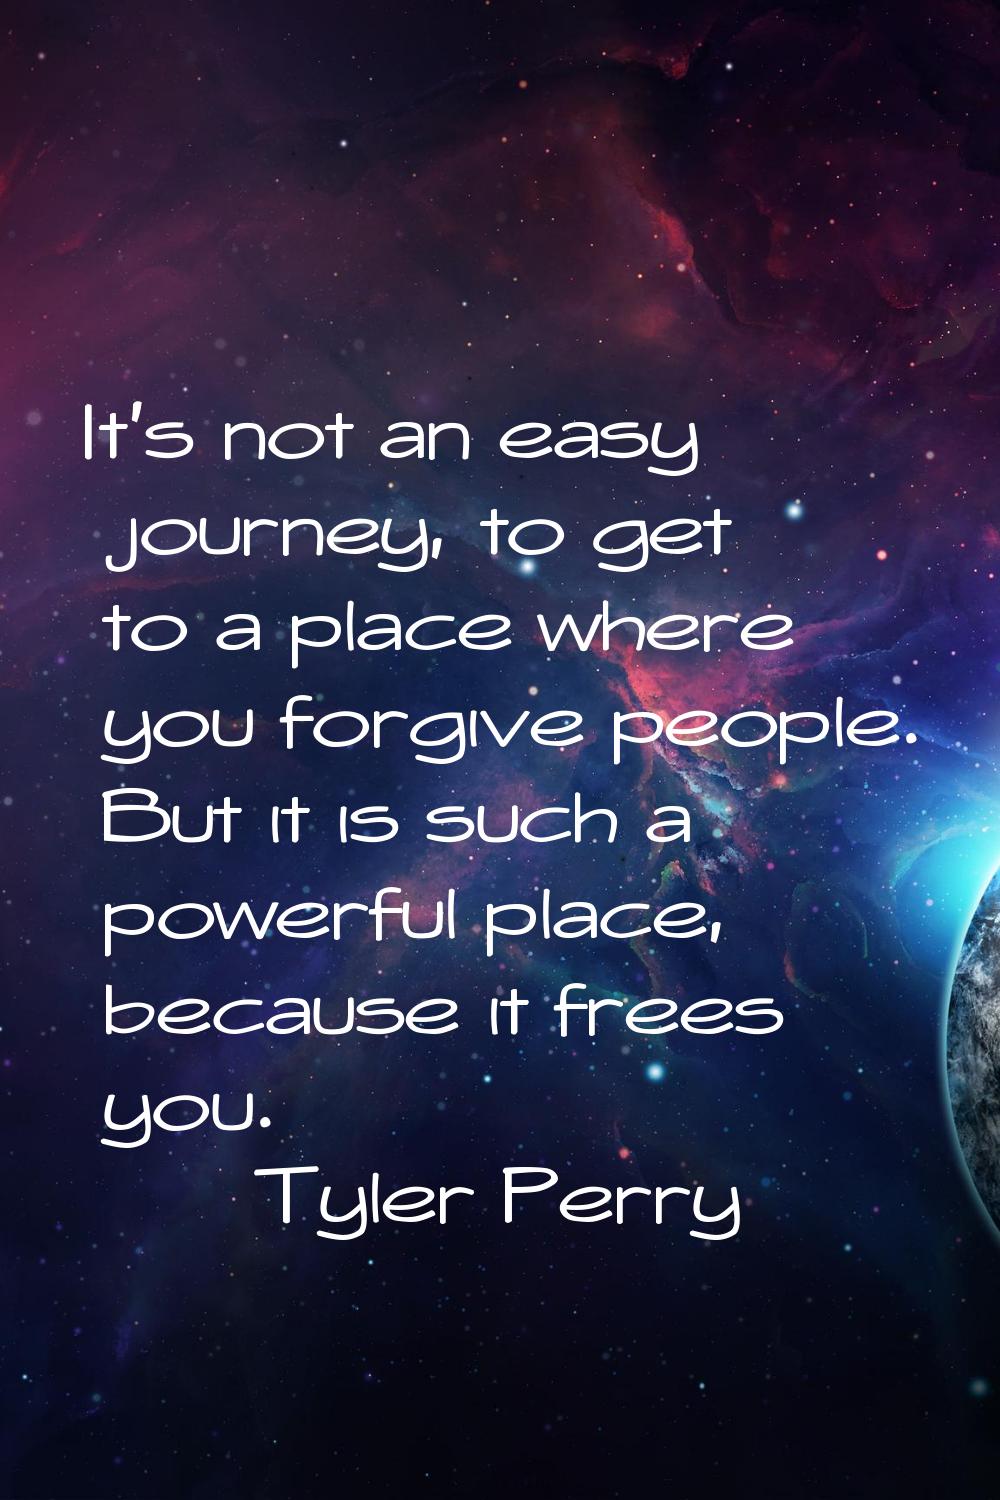 It's not an easy journey, to get to a place where you forgive people. But it is such a powerful pla